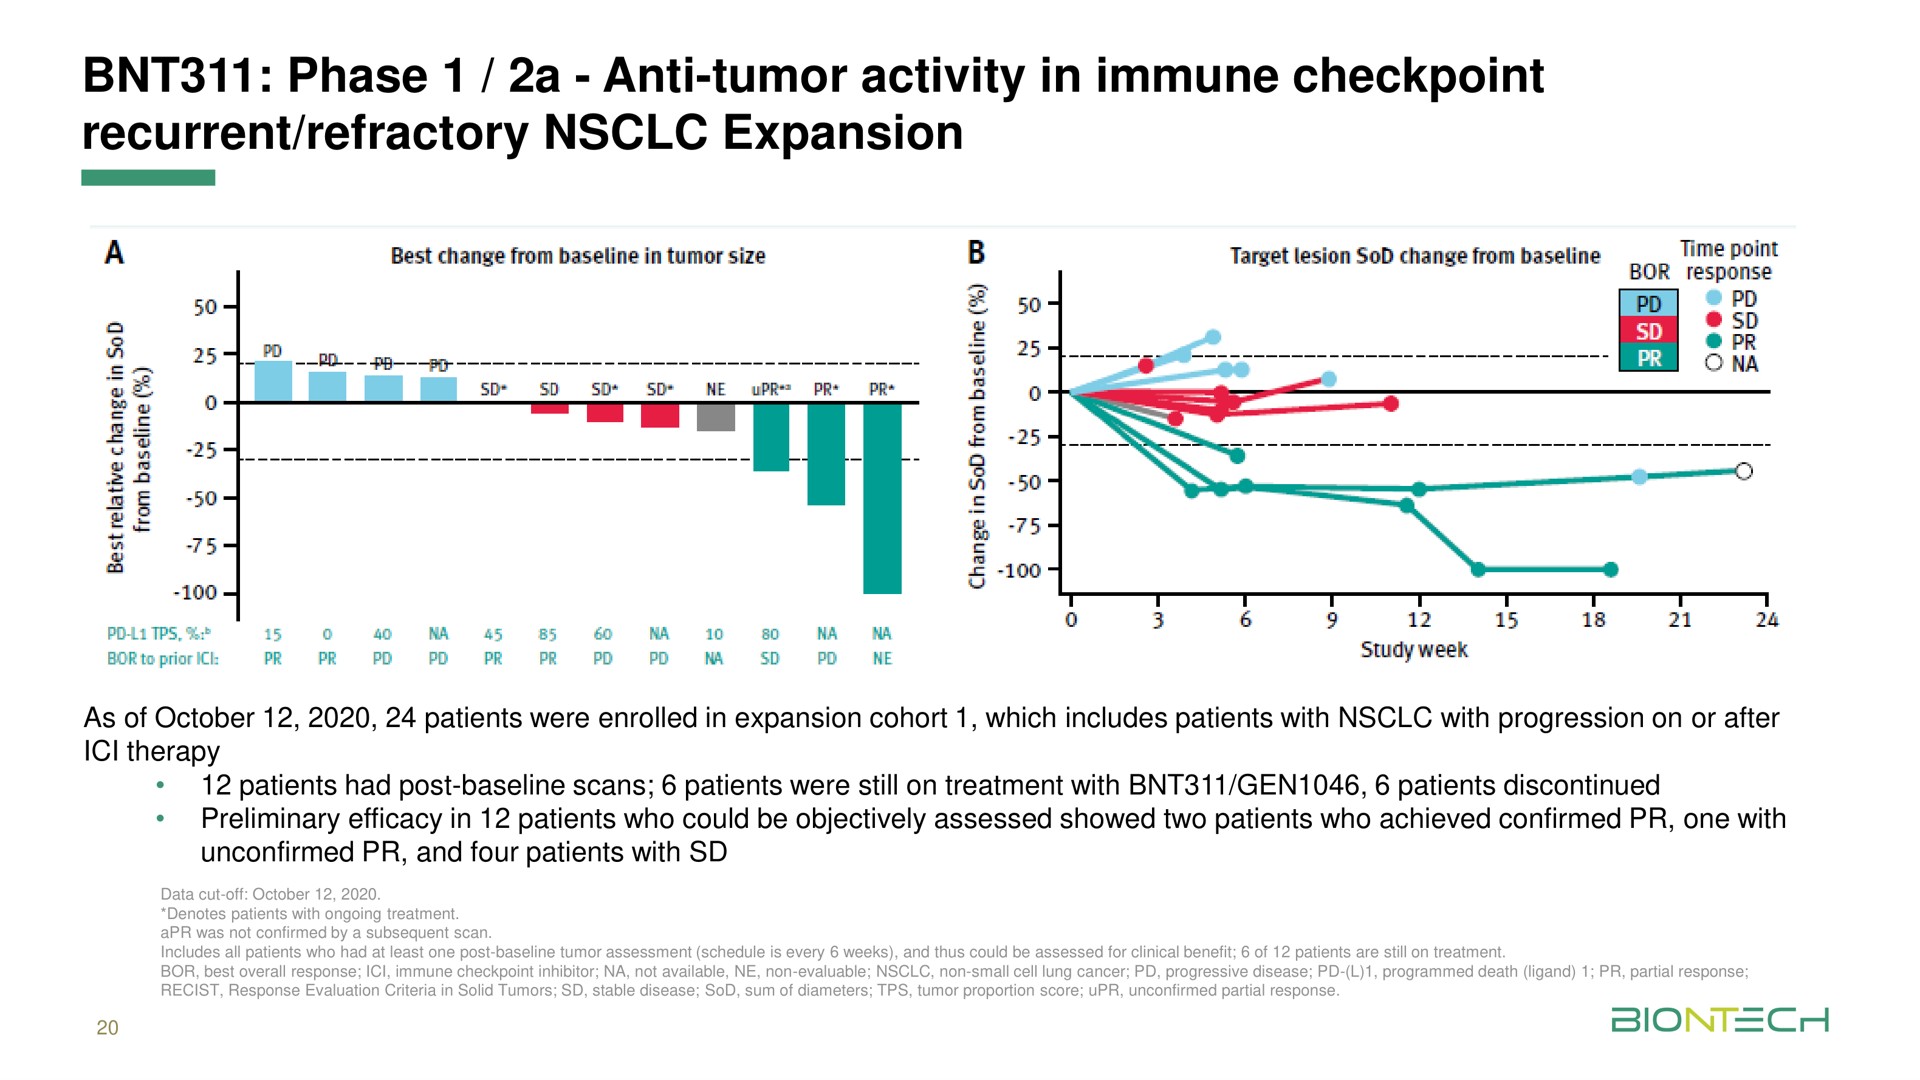 phase a anti tumor activity in immune recurrent refractory expansion | BioNTech